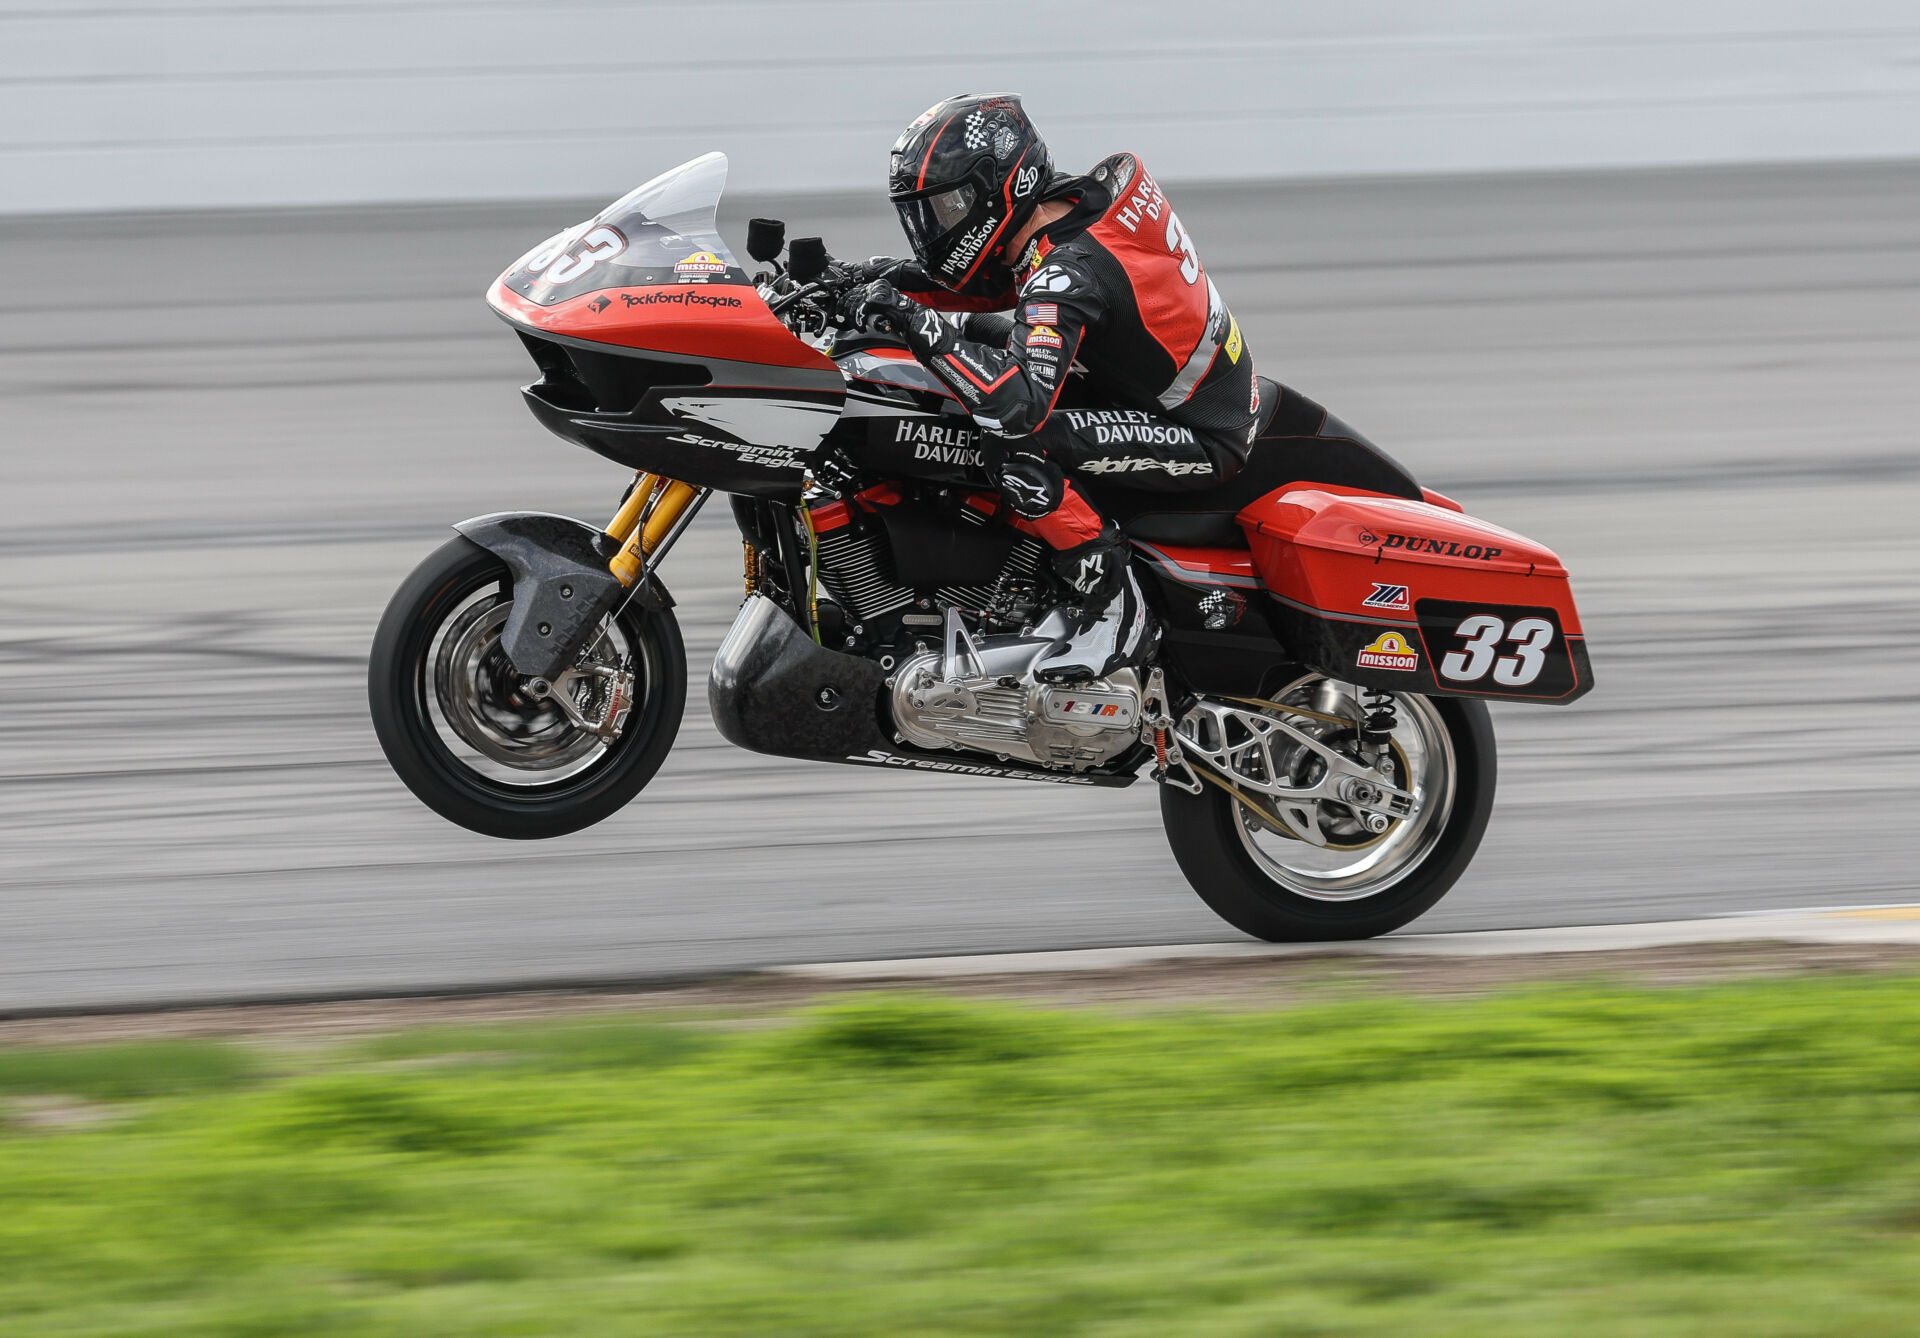 Following his perfect weekend at Daytona, Kyle Wyman (33) leads the Mission King Of The Baggers Championship as the series heads to Circuit of The Americas for round two, April 12-13. Photo by Brian J. Nelson.